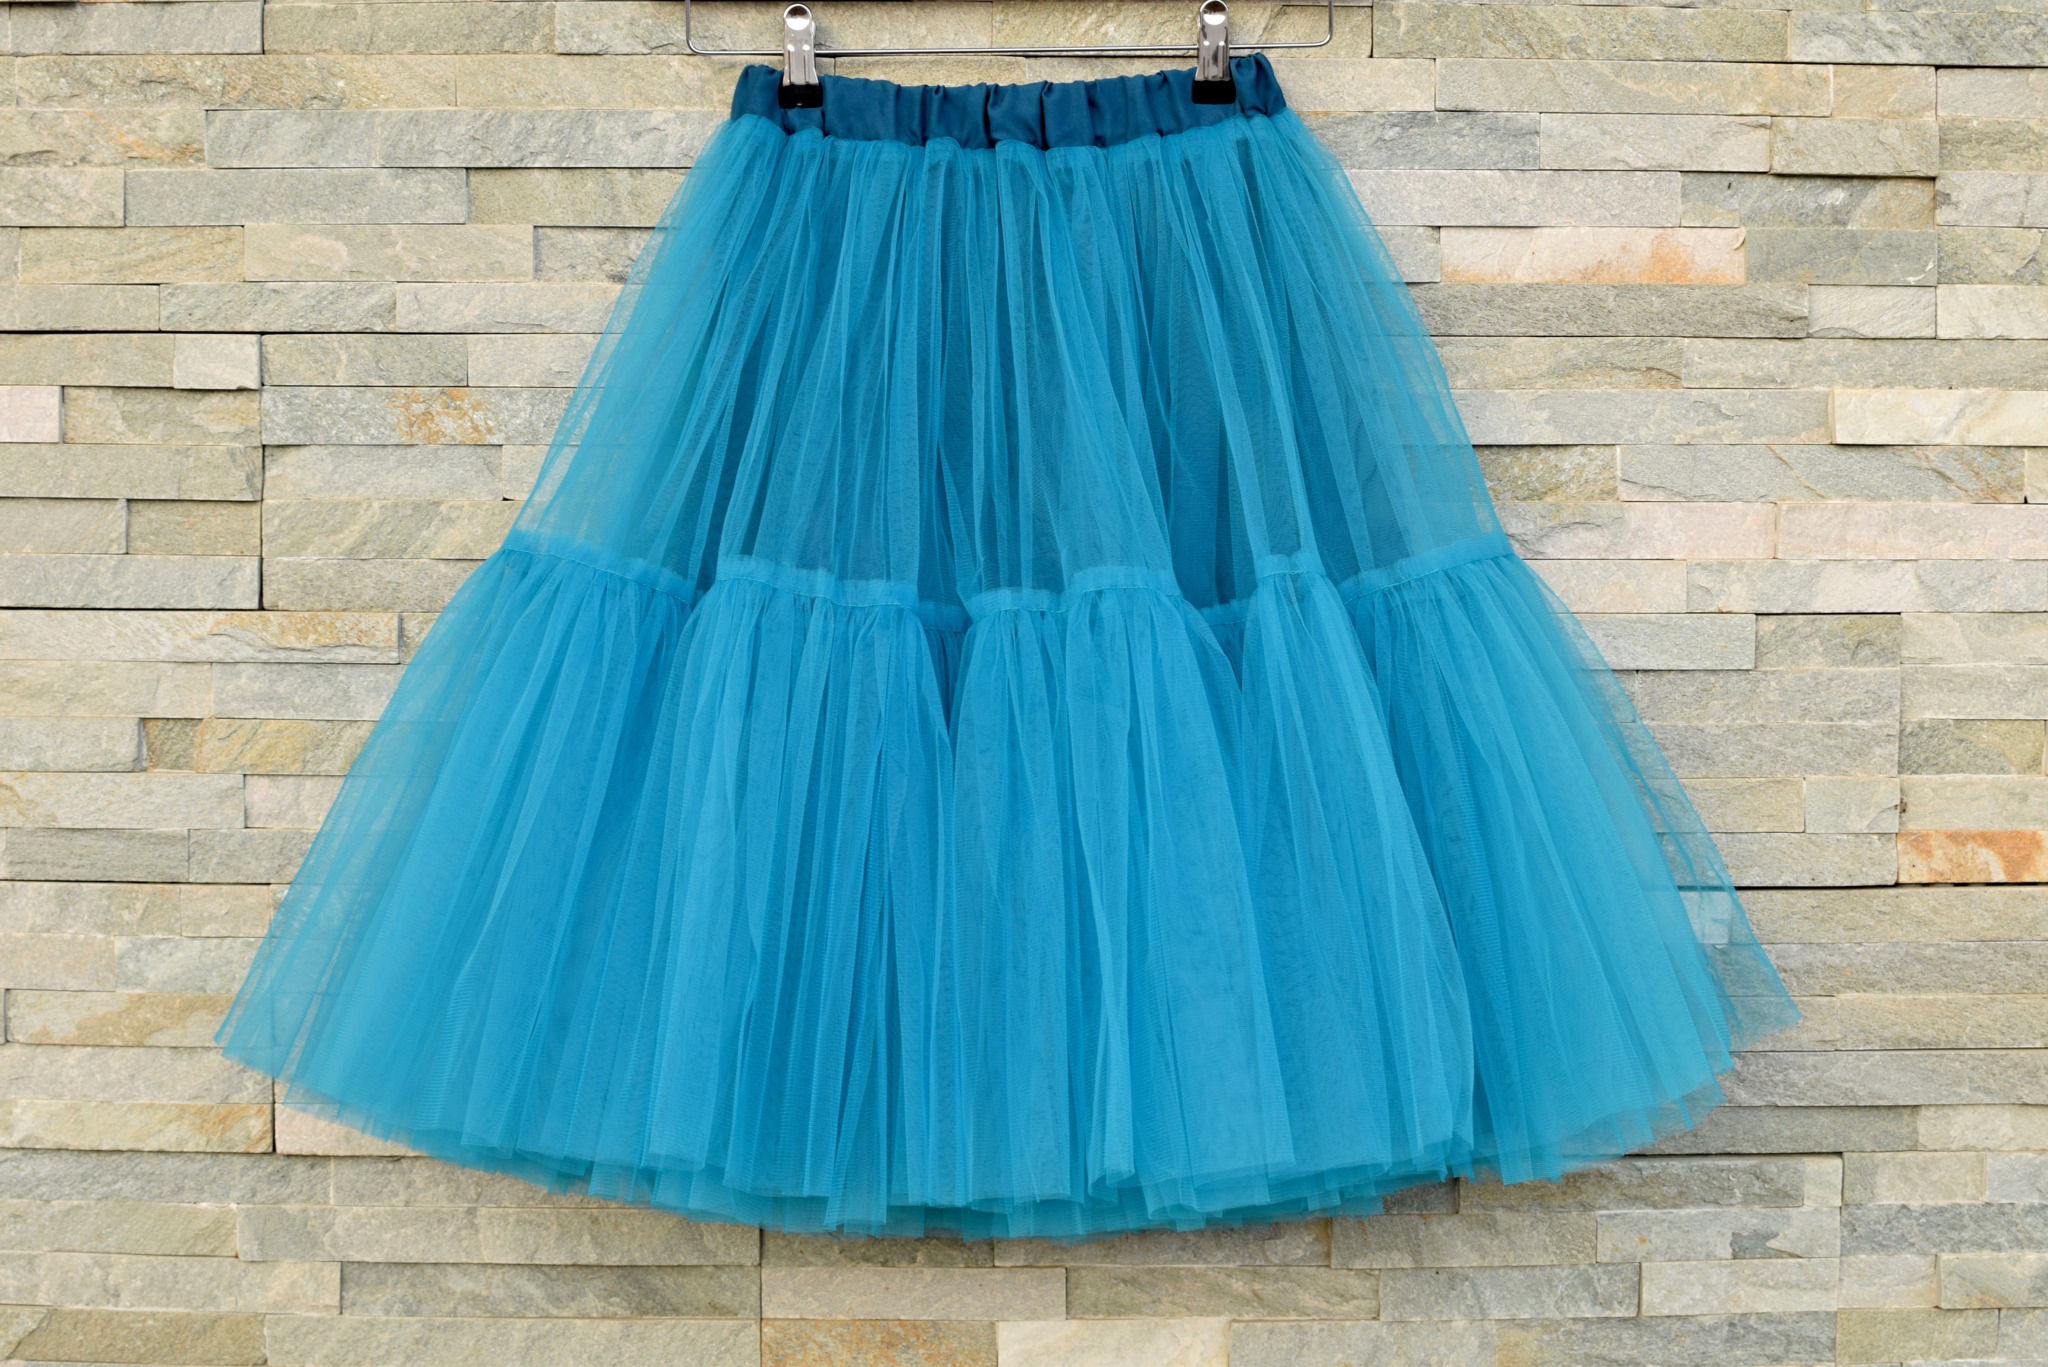 How to make a tiered tulle skirt tutorial - I Can Sew This